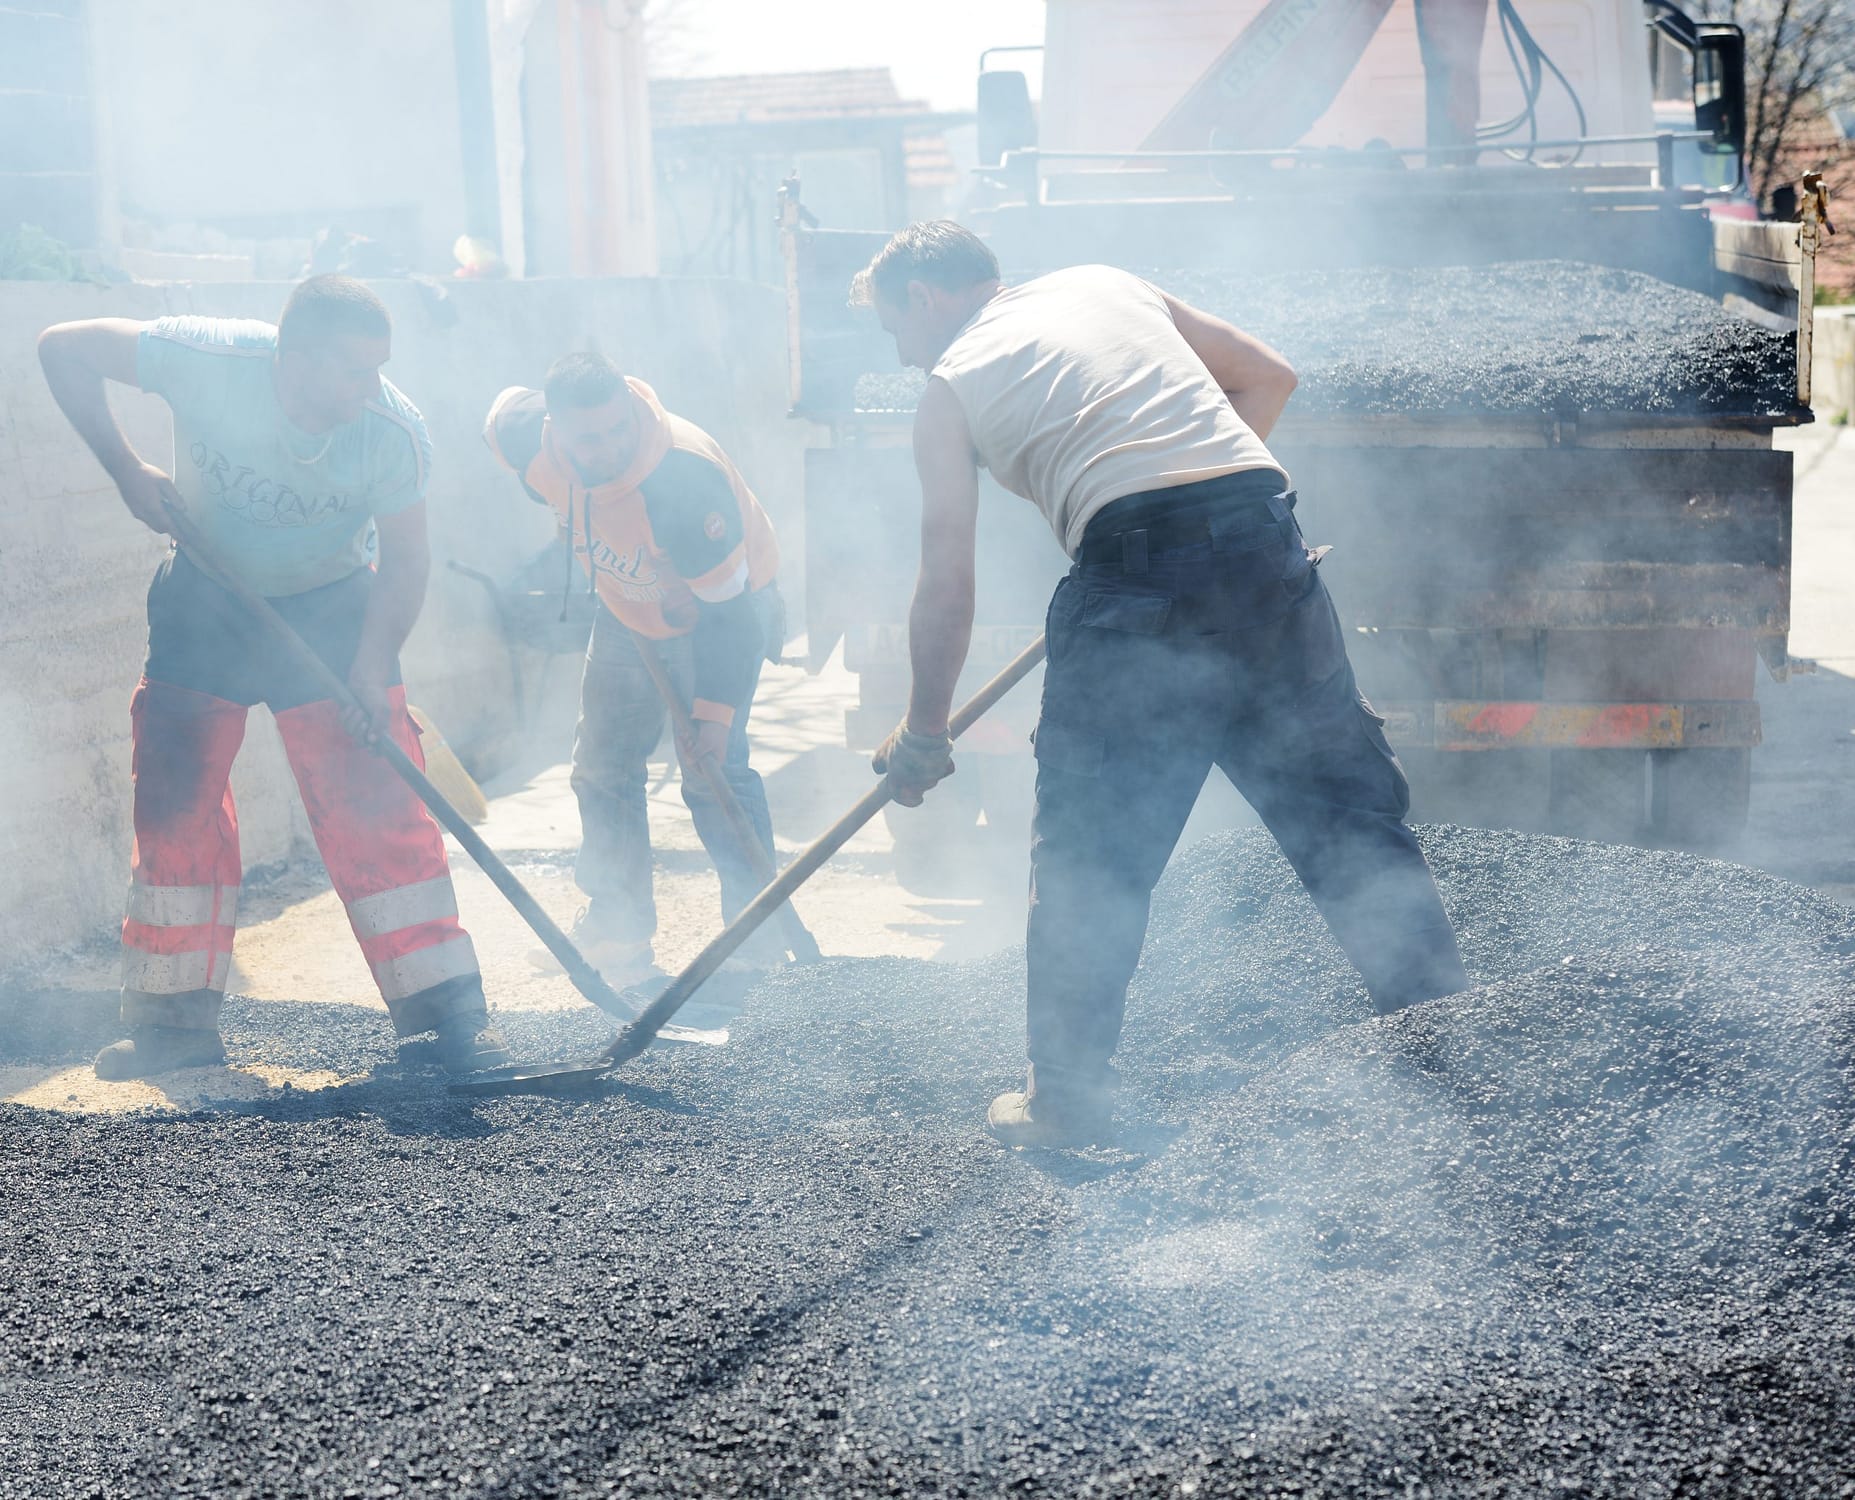 Road construction workers in hot asphalt.